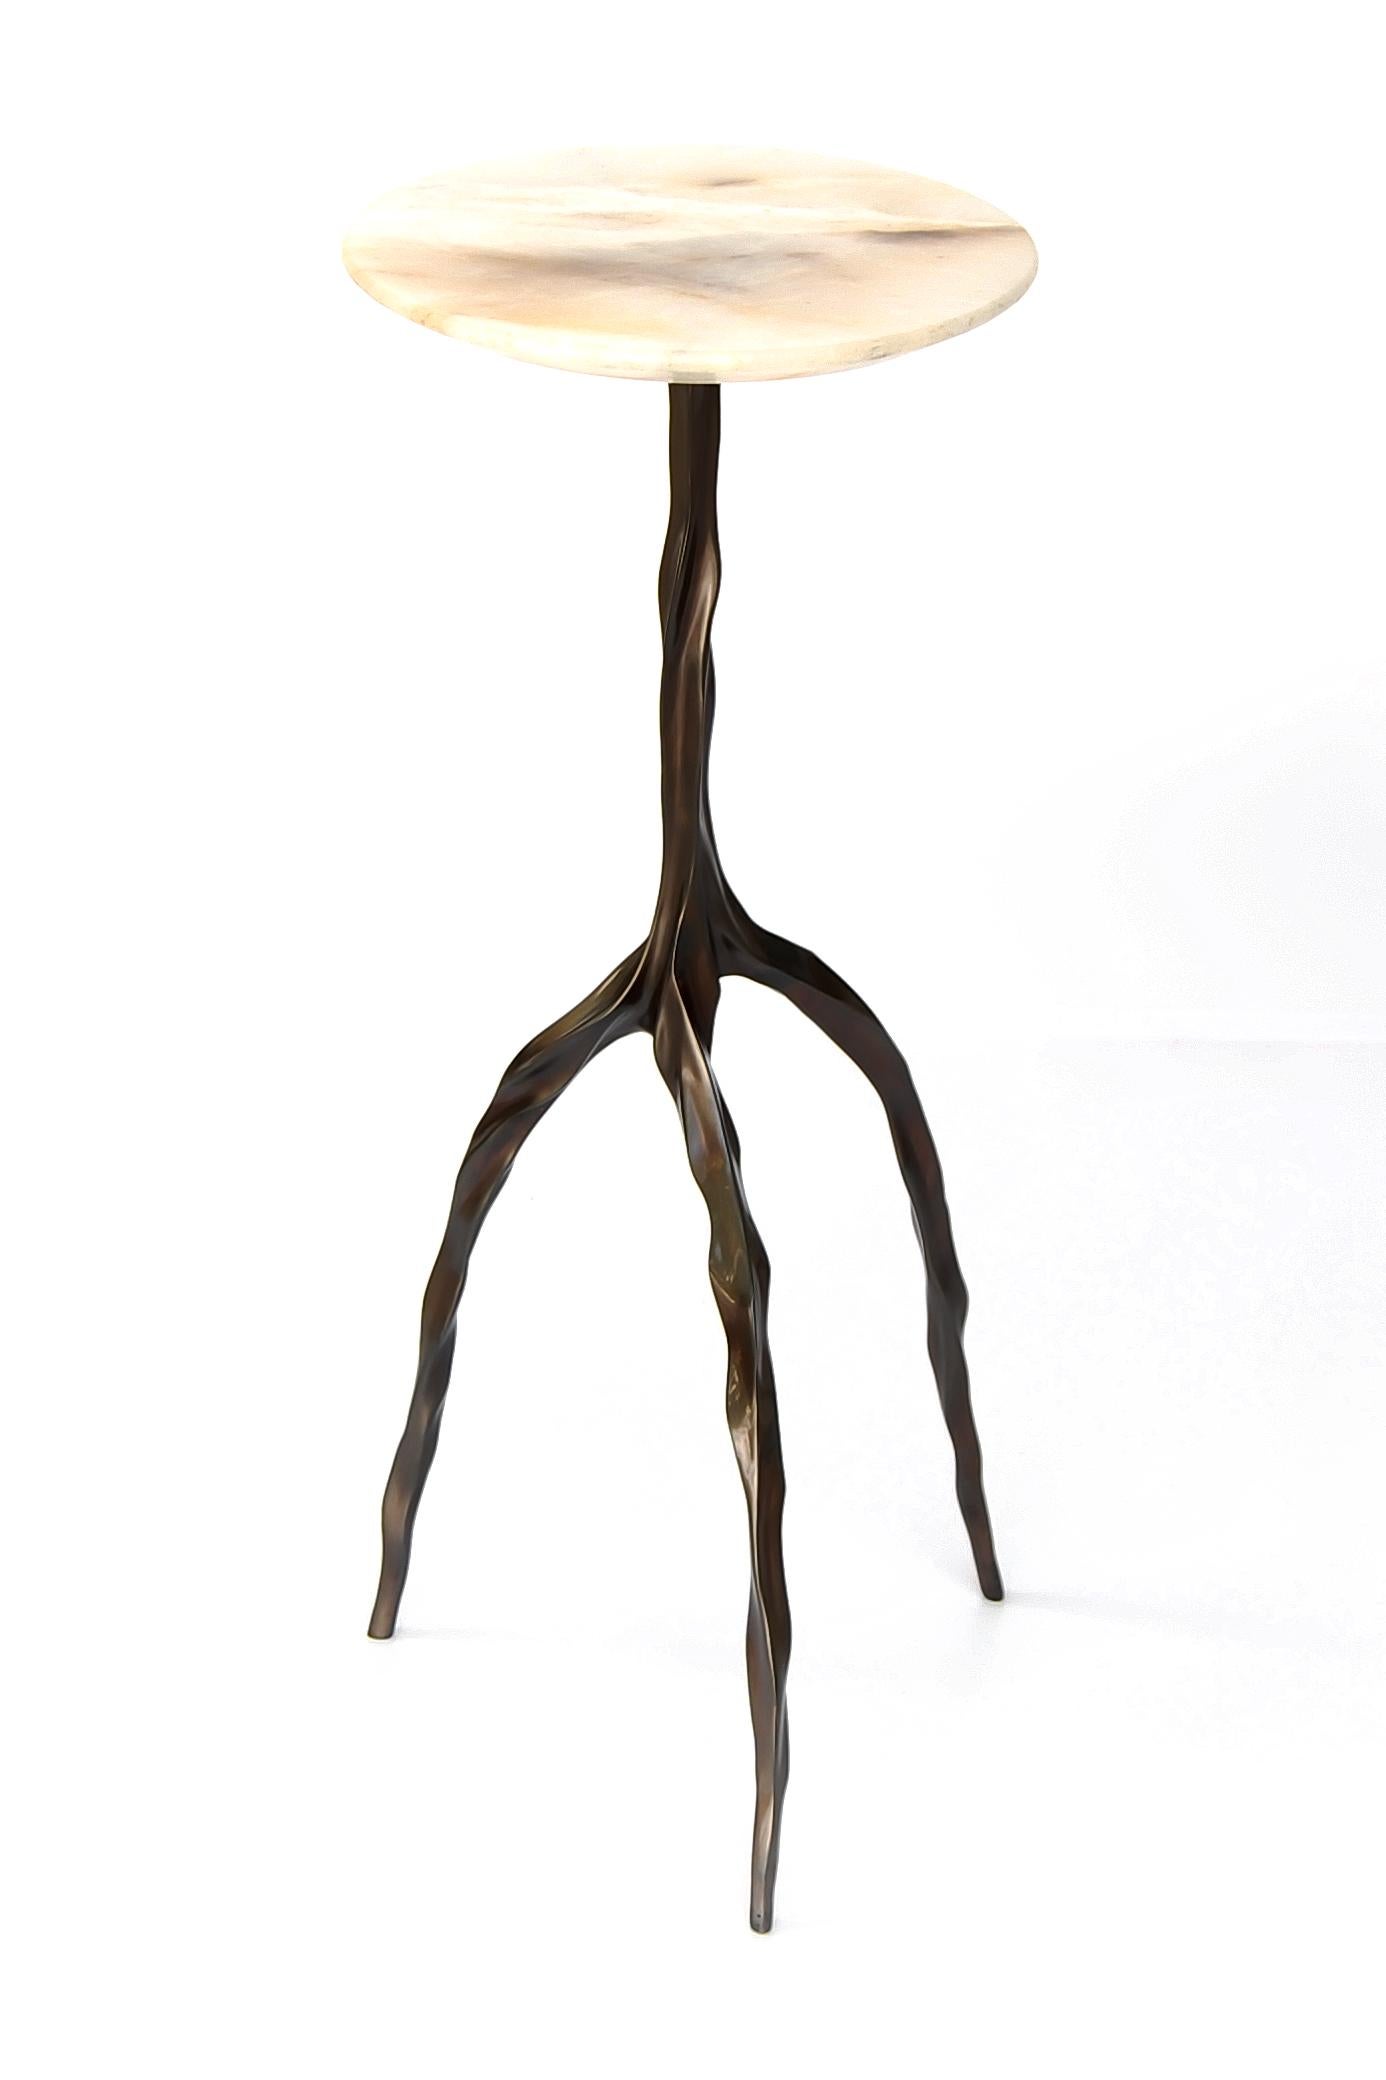 Brazilian Nina Drink Table with Onyx Top by Fakasaka Design For Sale